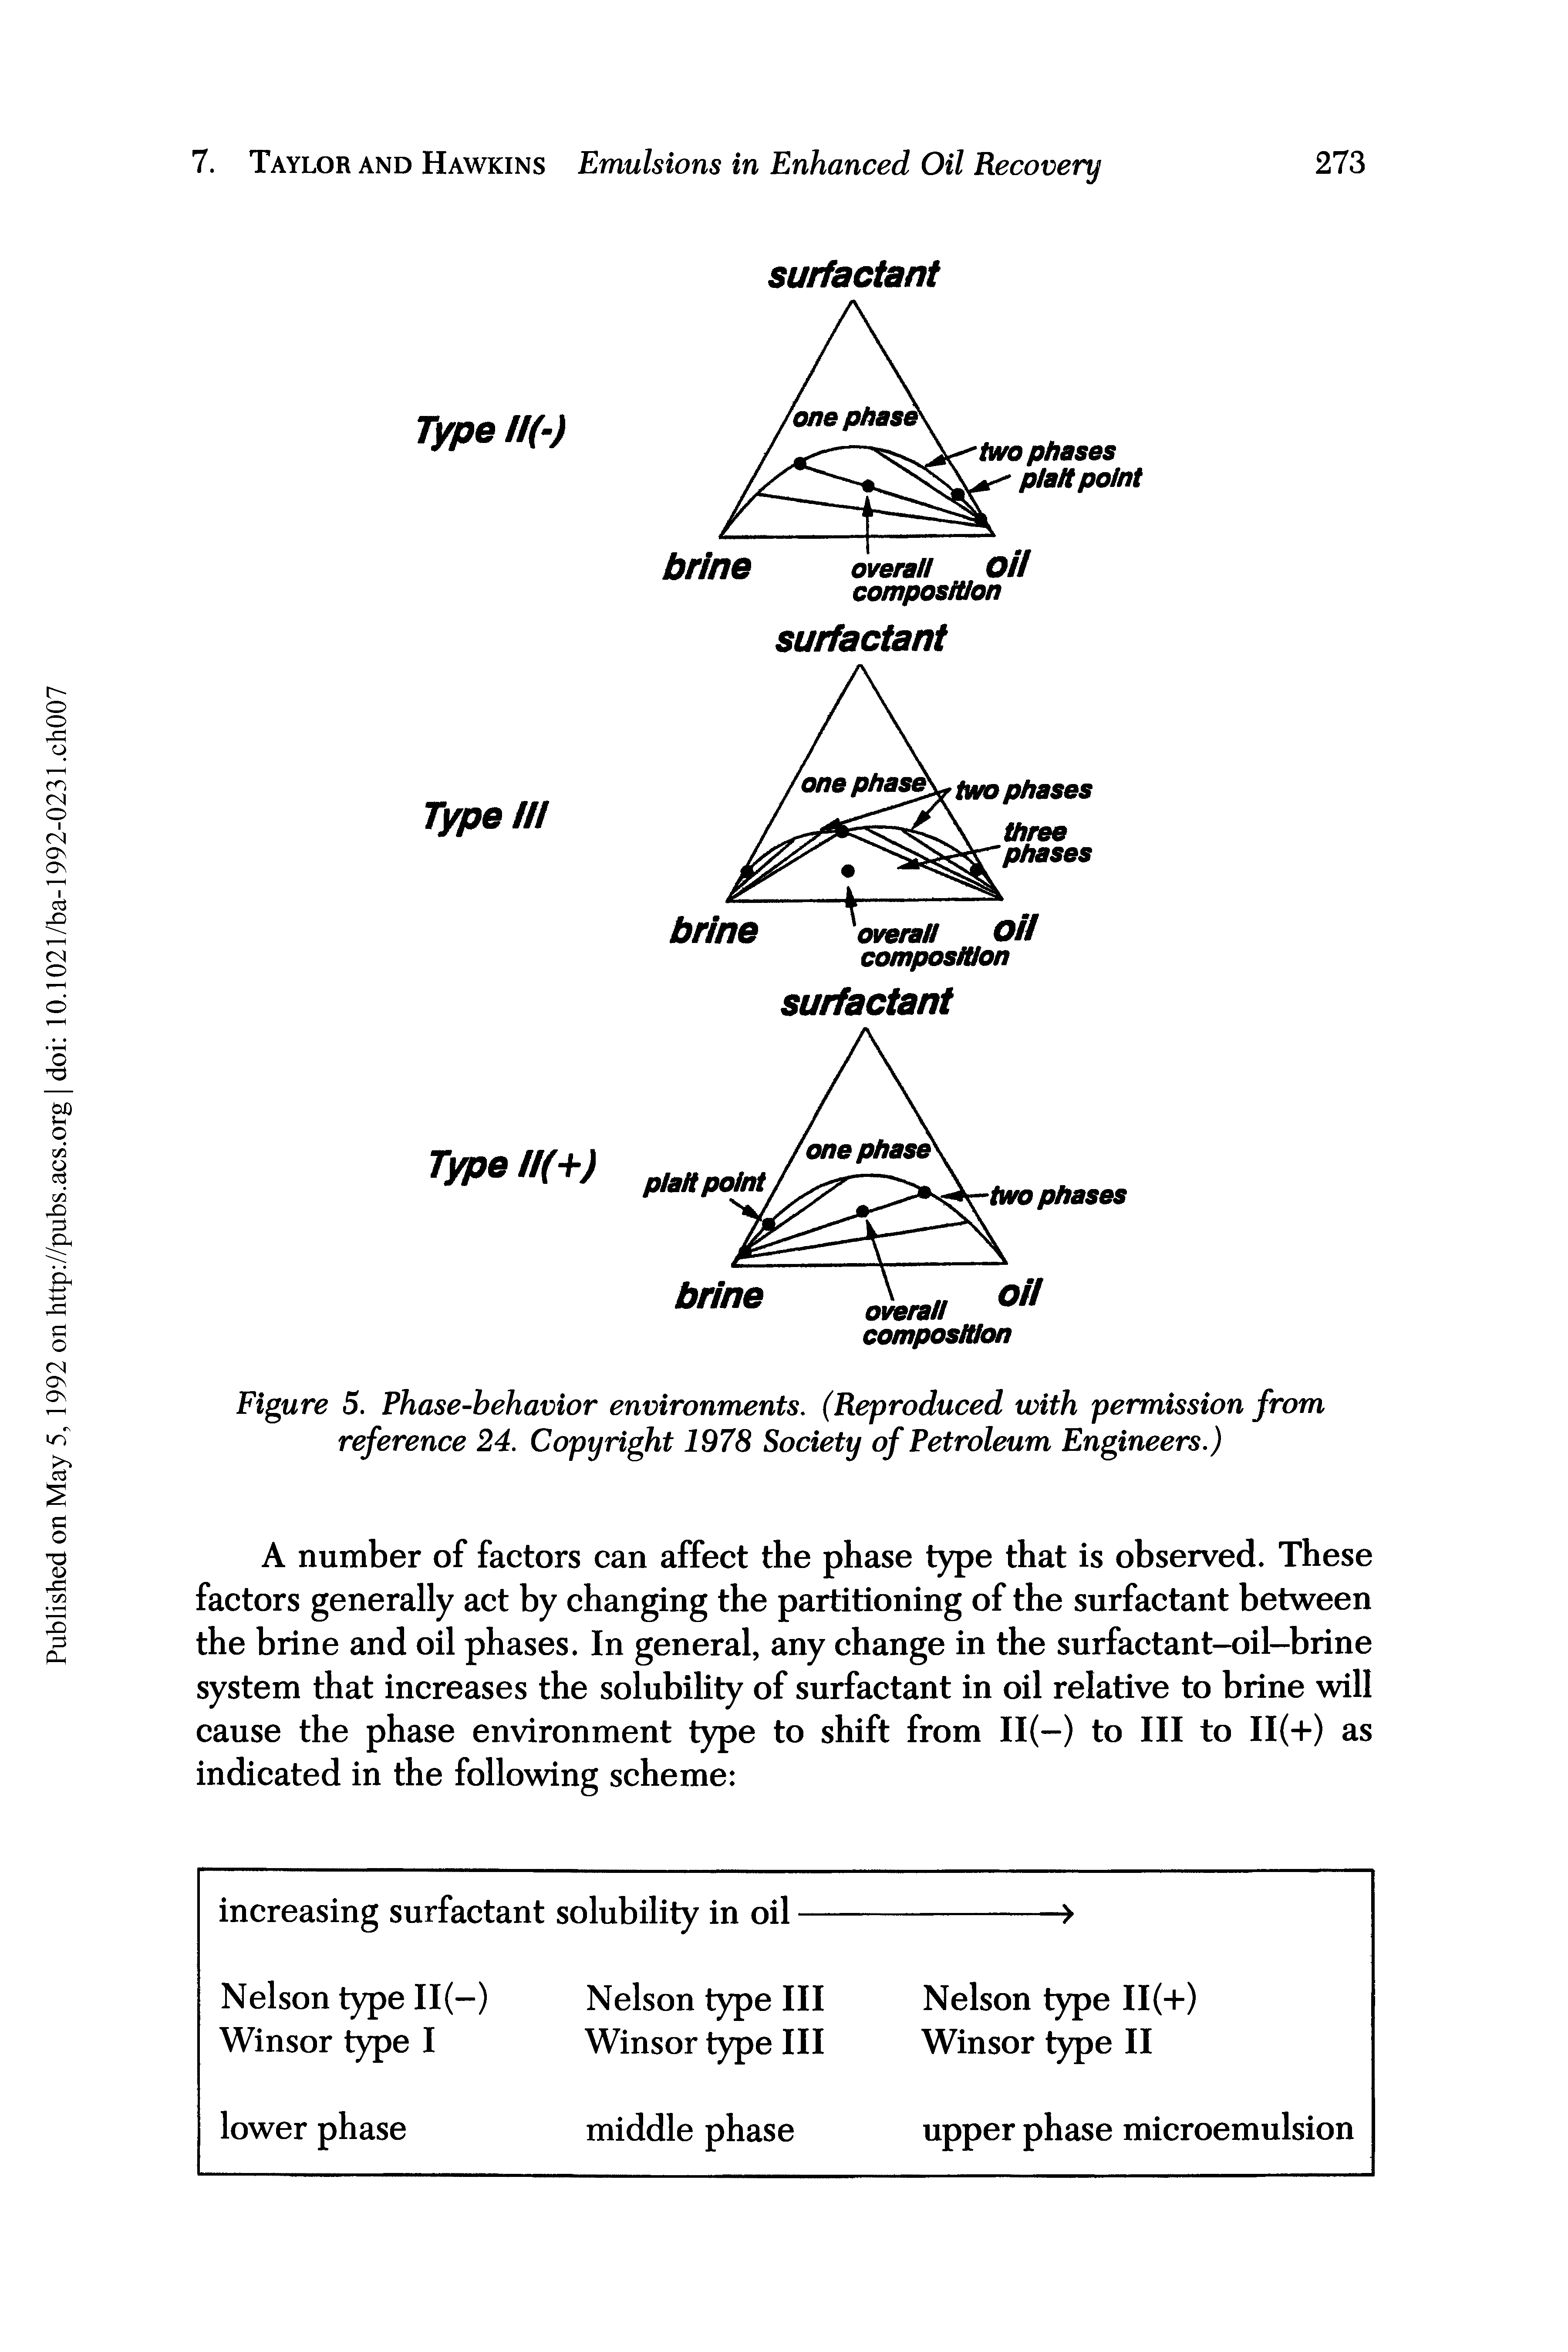 Figure 5. Phase-behavior environments. (Reproduced with permission from reference 24. Copyright 1978 Society of Petroleum Engineers.)...